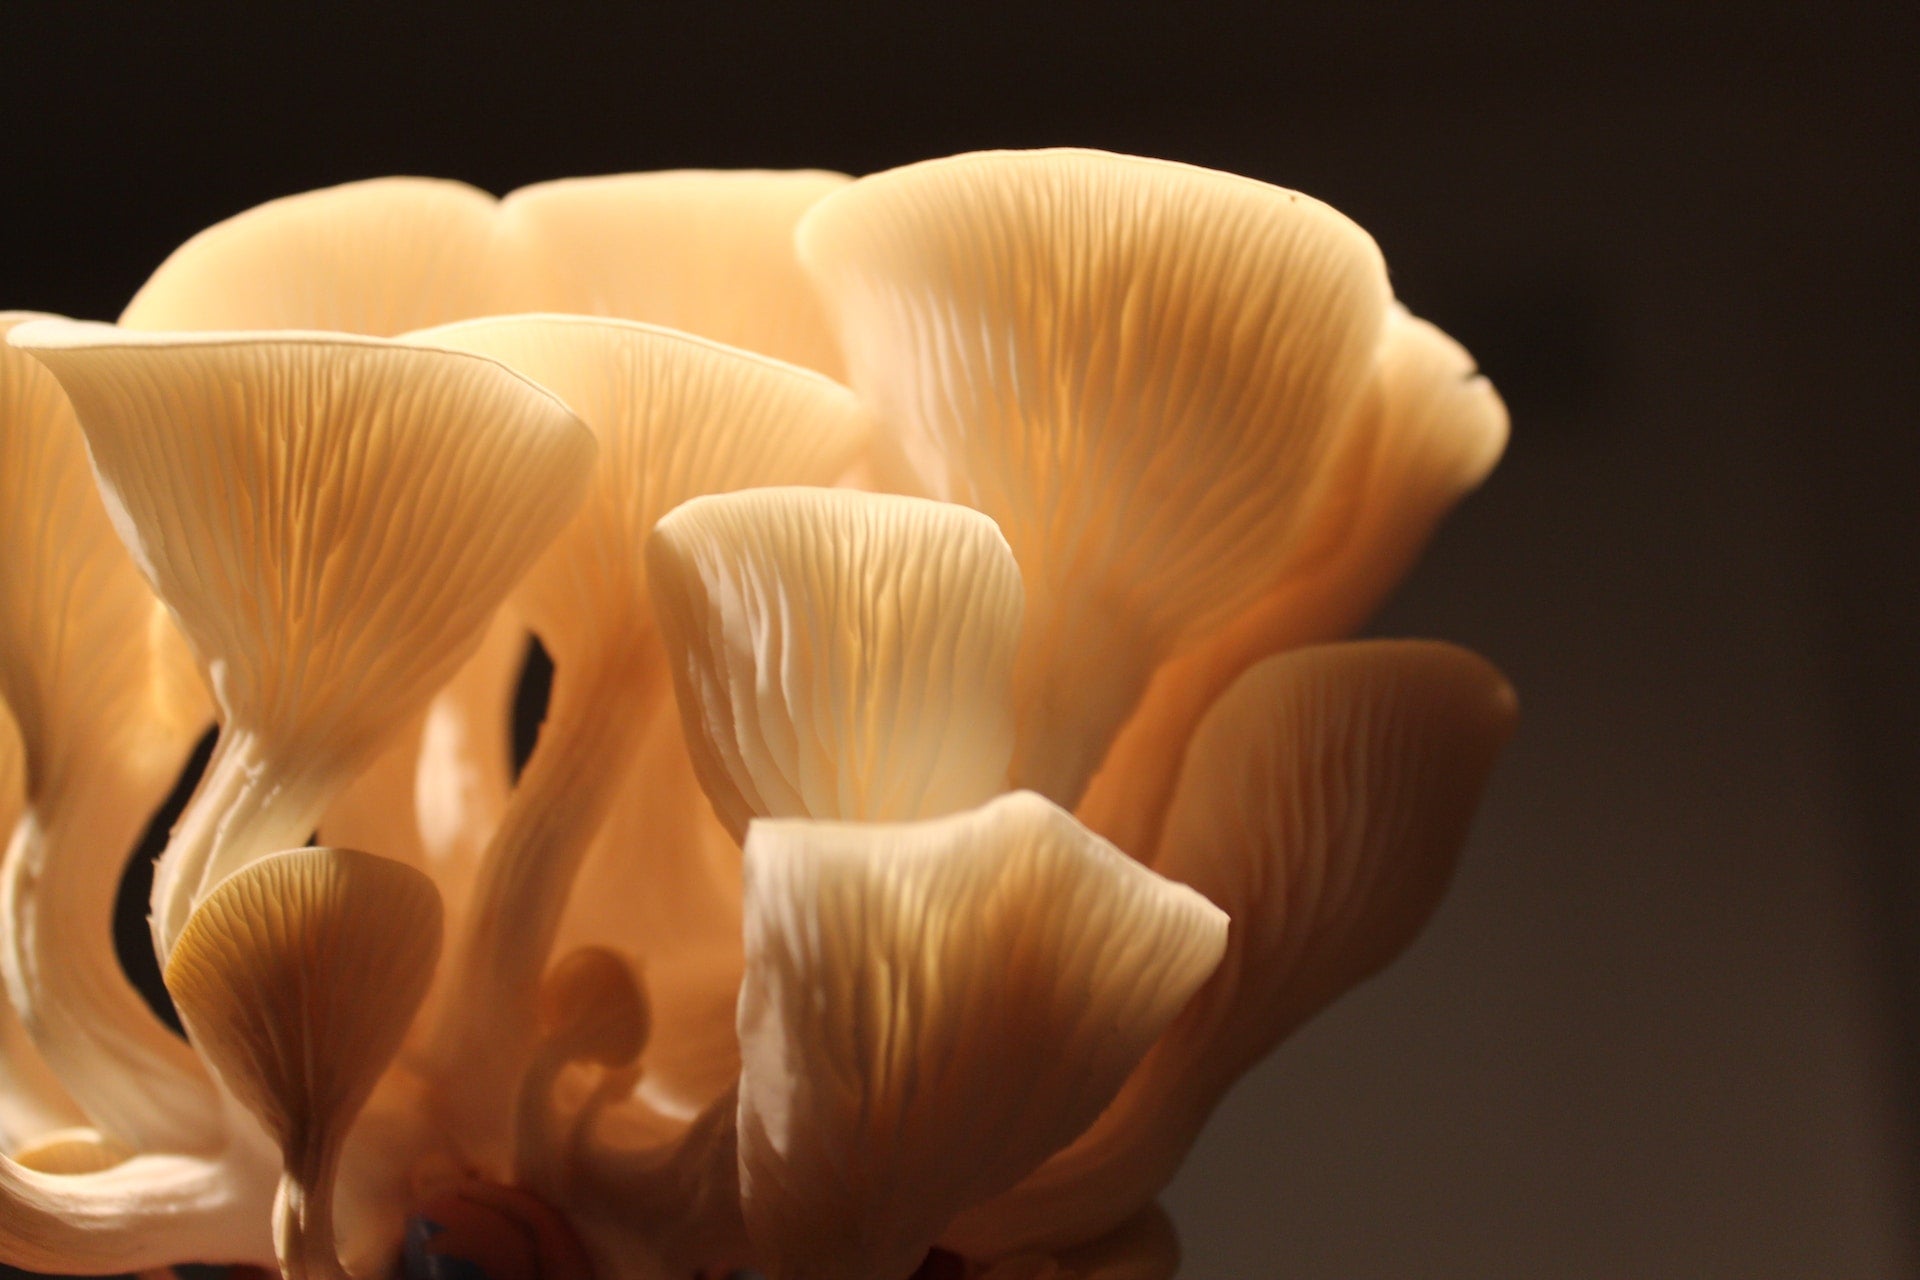 oyster mushrooms are one of the easiest mushrooms to grow